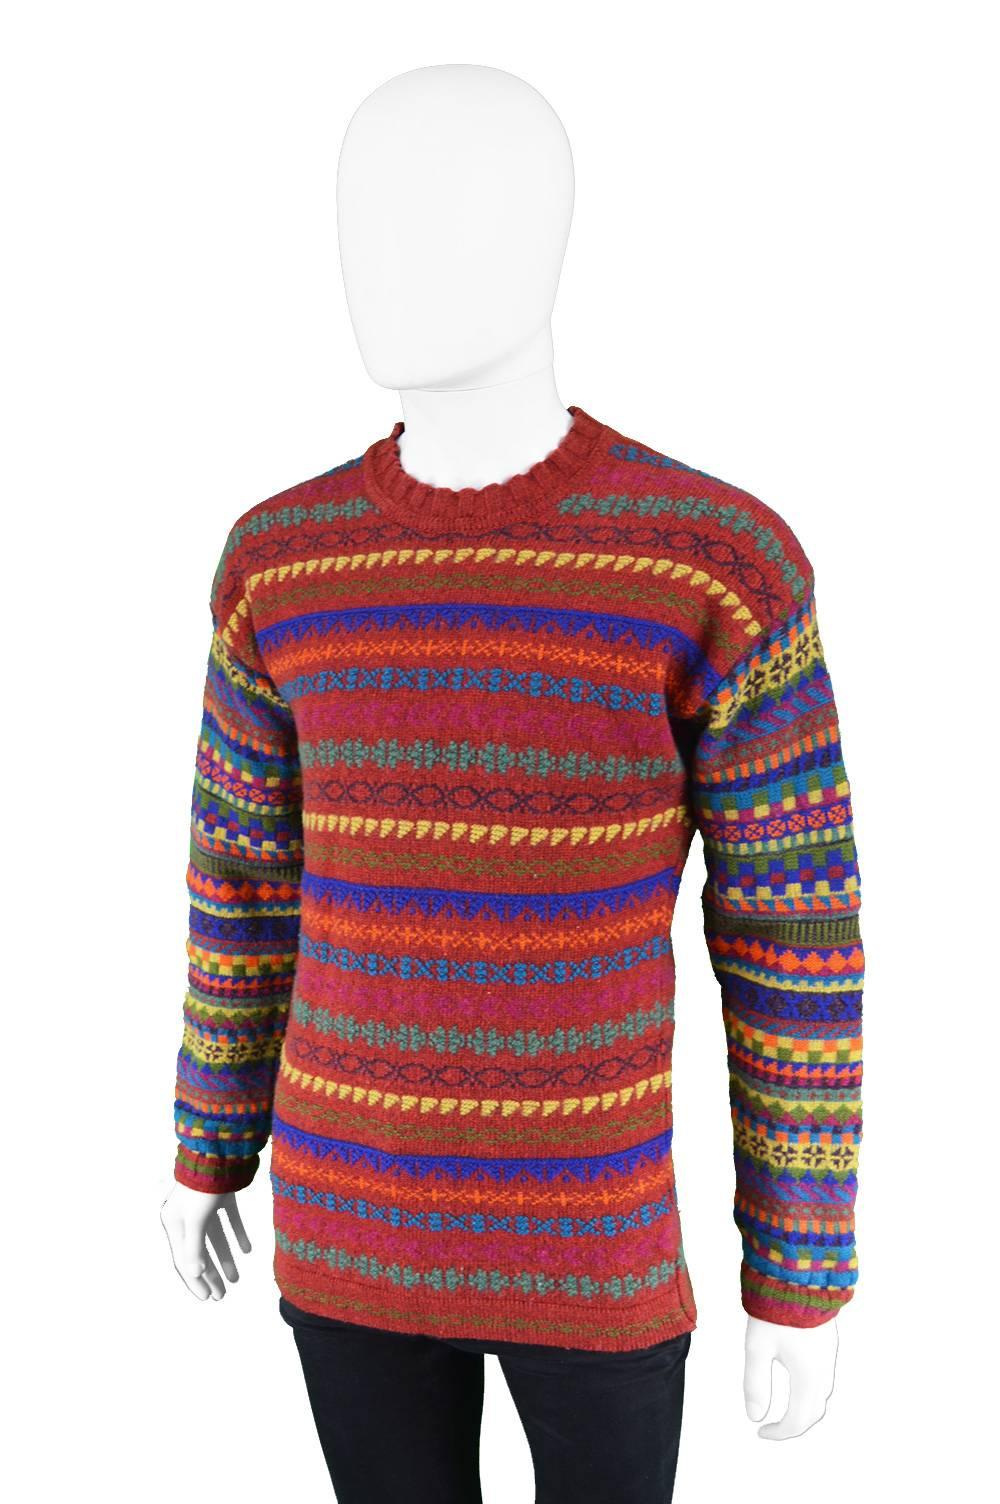 Kenzo Homme Men's Red Geometric Knit Vintage Panelled Sweater, 1980s For Sale 2